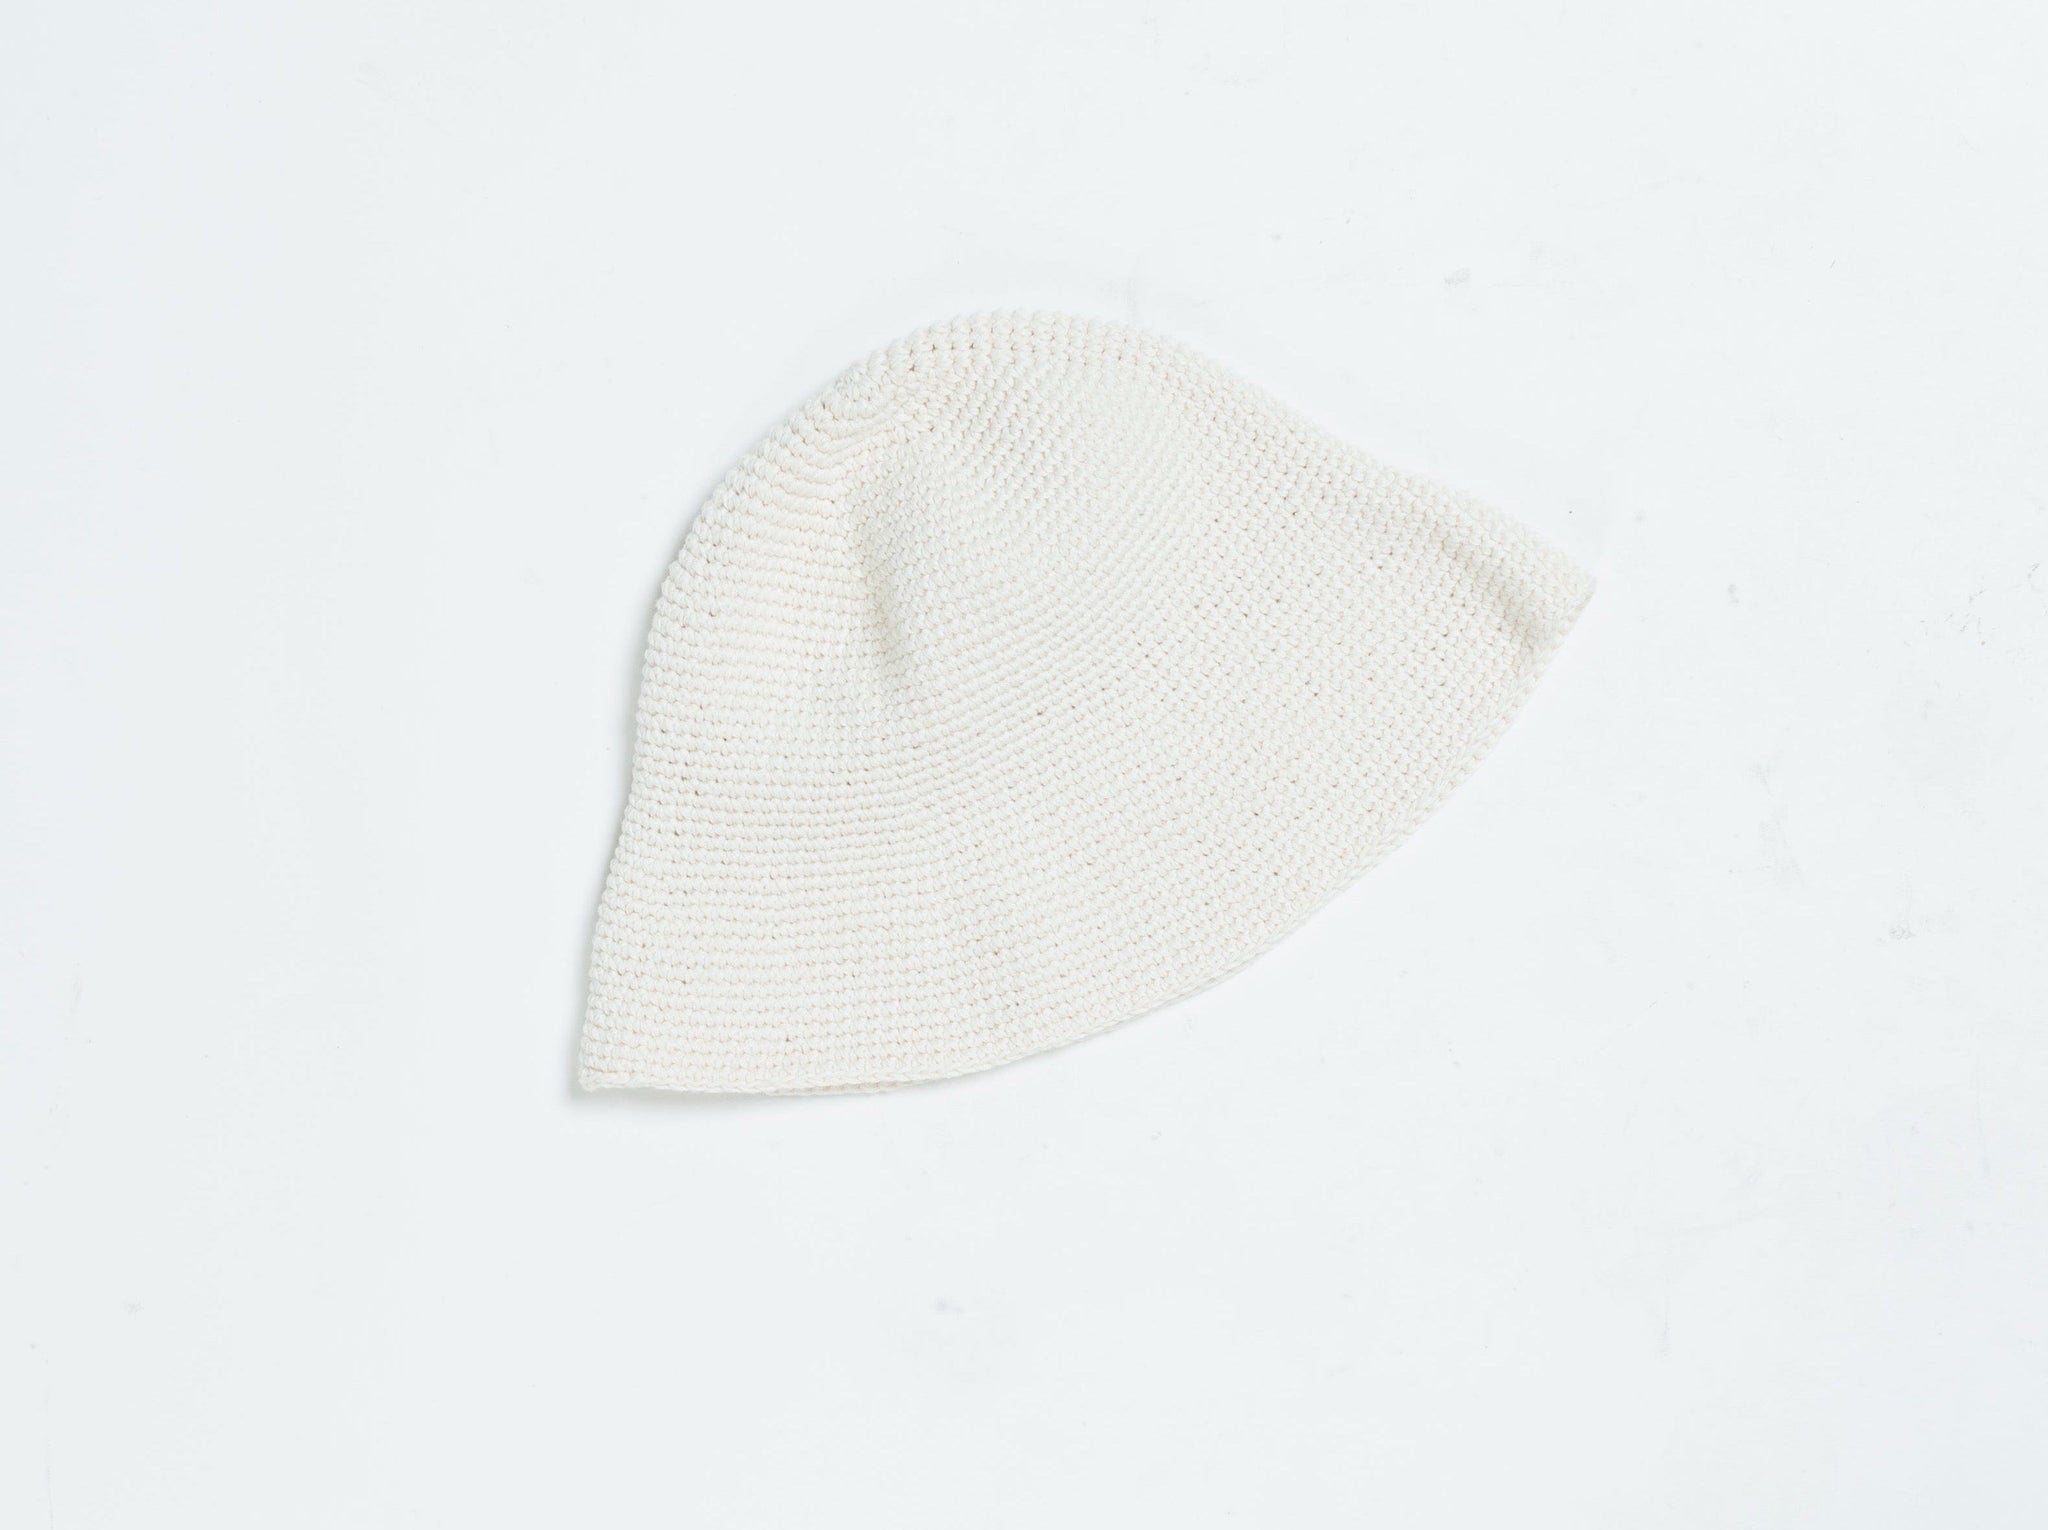 A vintage-inspired Crochet Bell Hat - Ivory on a white surface.